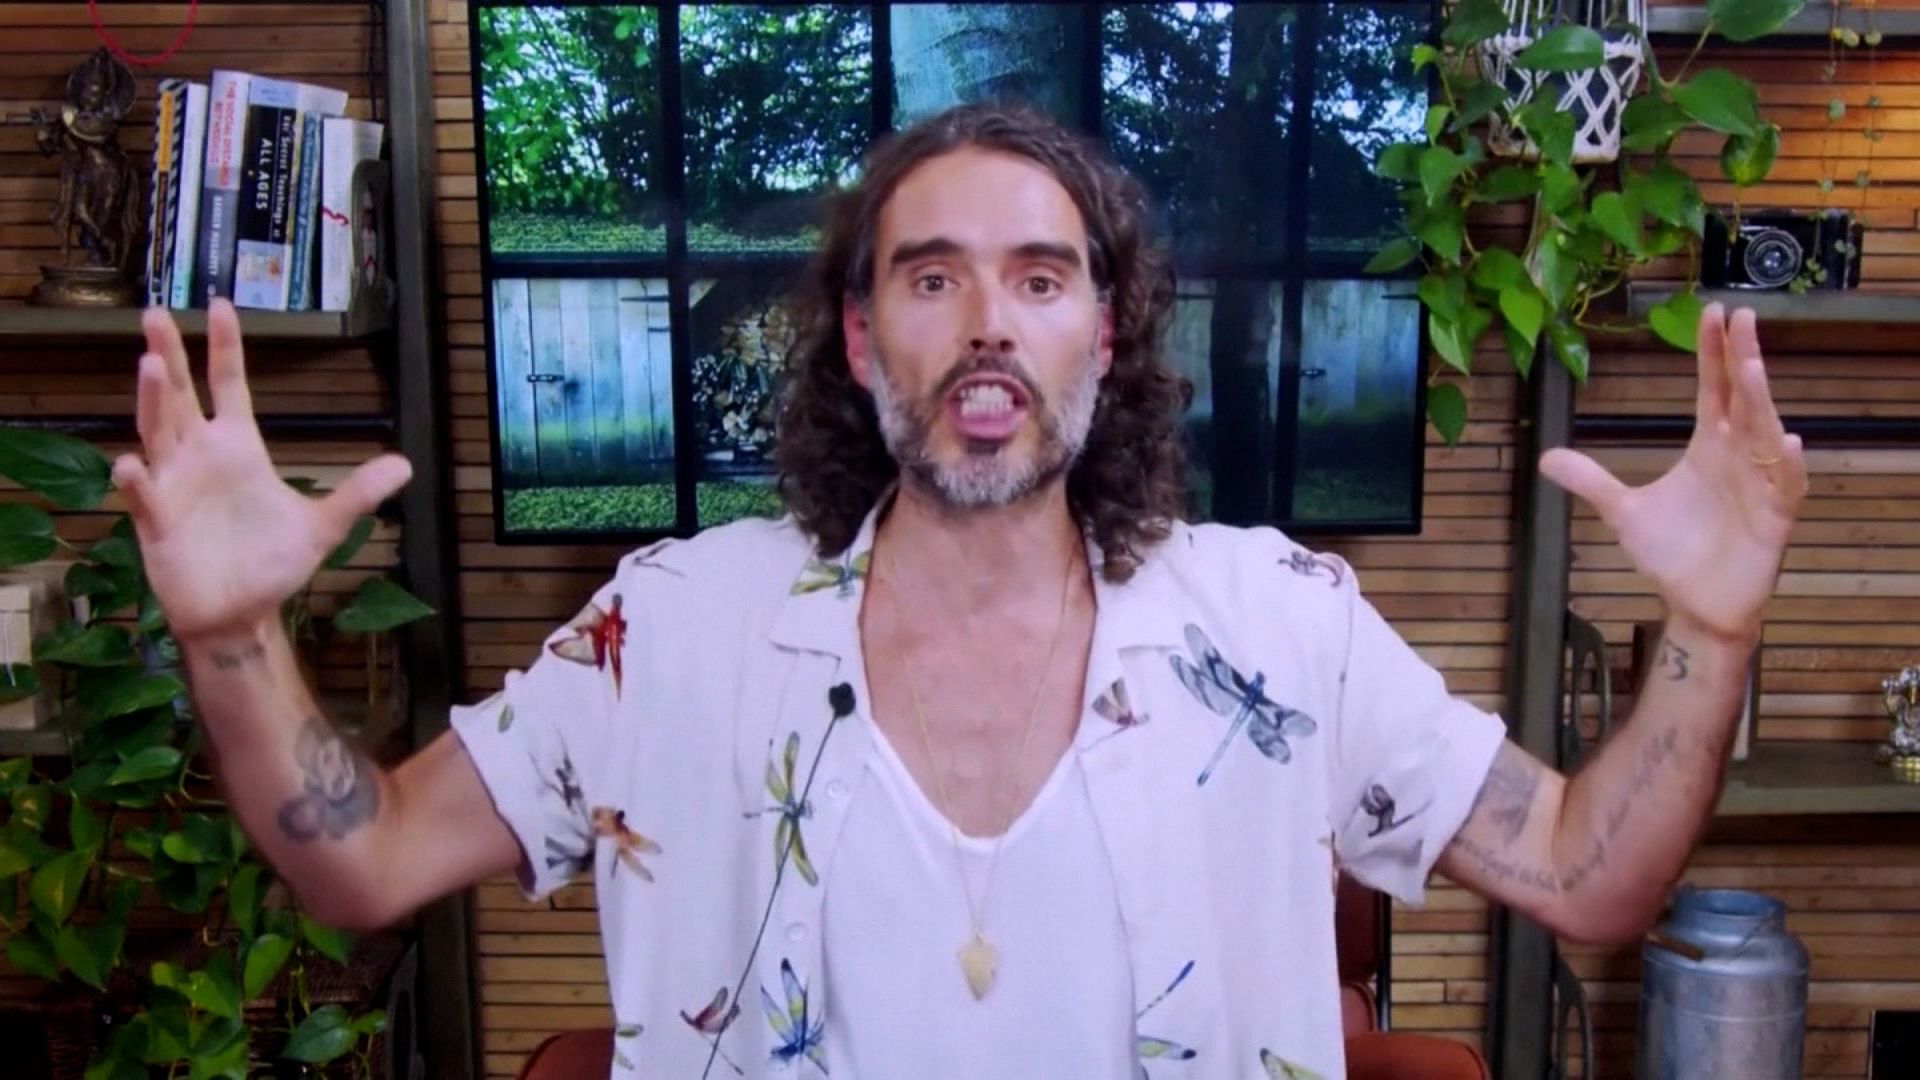 Machine DECLARES WAR On Russell Brand, Shows CANCELED, Agency Dumps Him Over Me Too Allegations